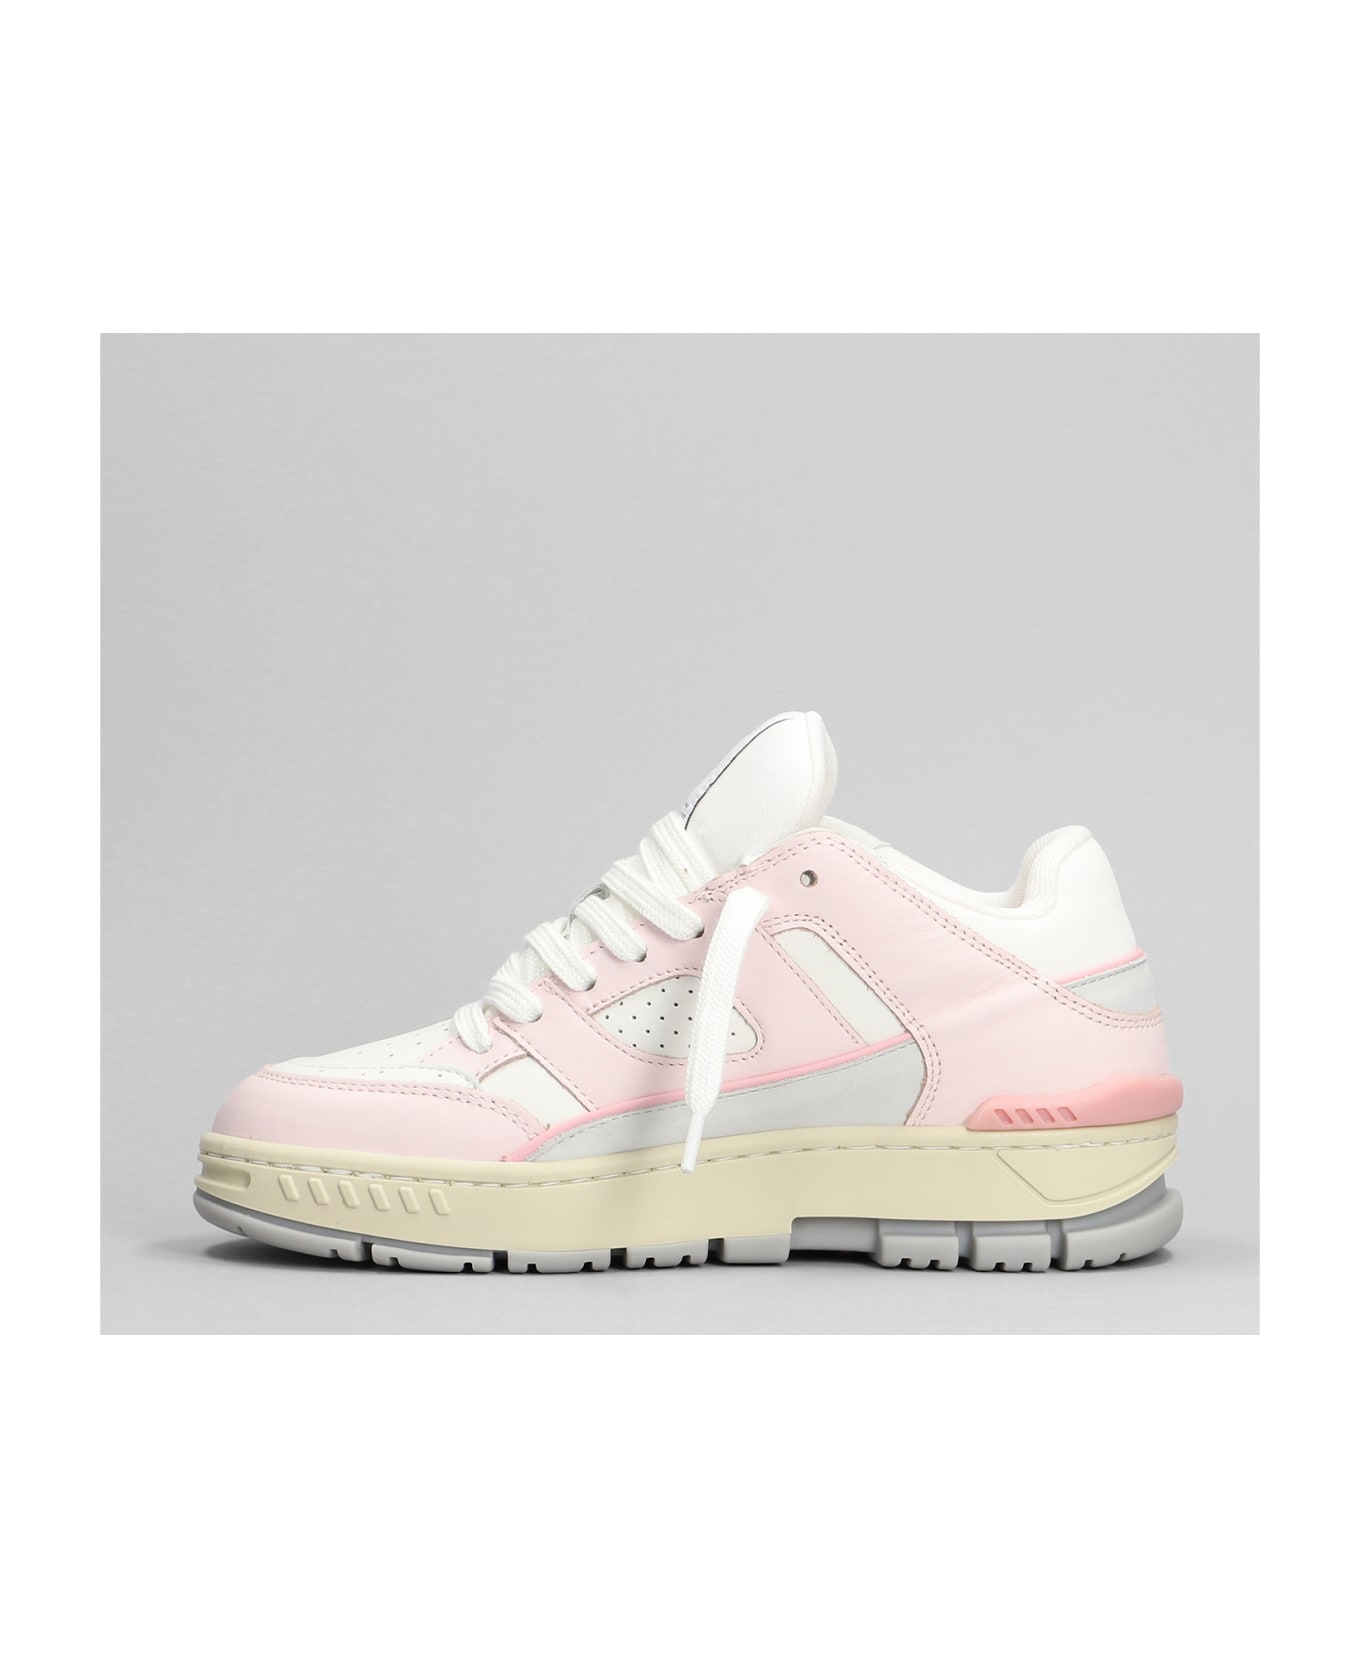 Axel Arigato Area Lo Sneaker Sneakers In Rose-pink Leather - rose-pink スニーカー